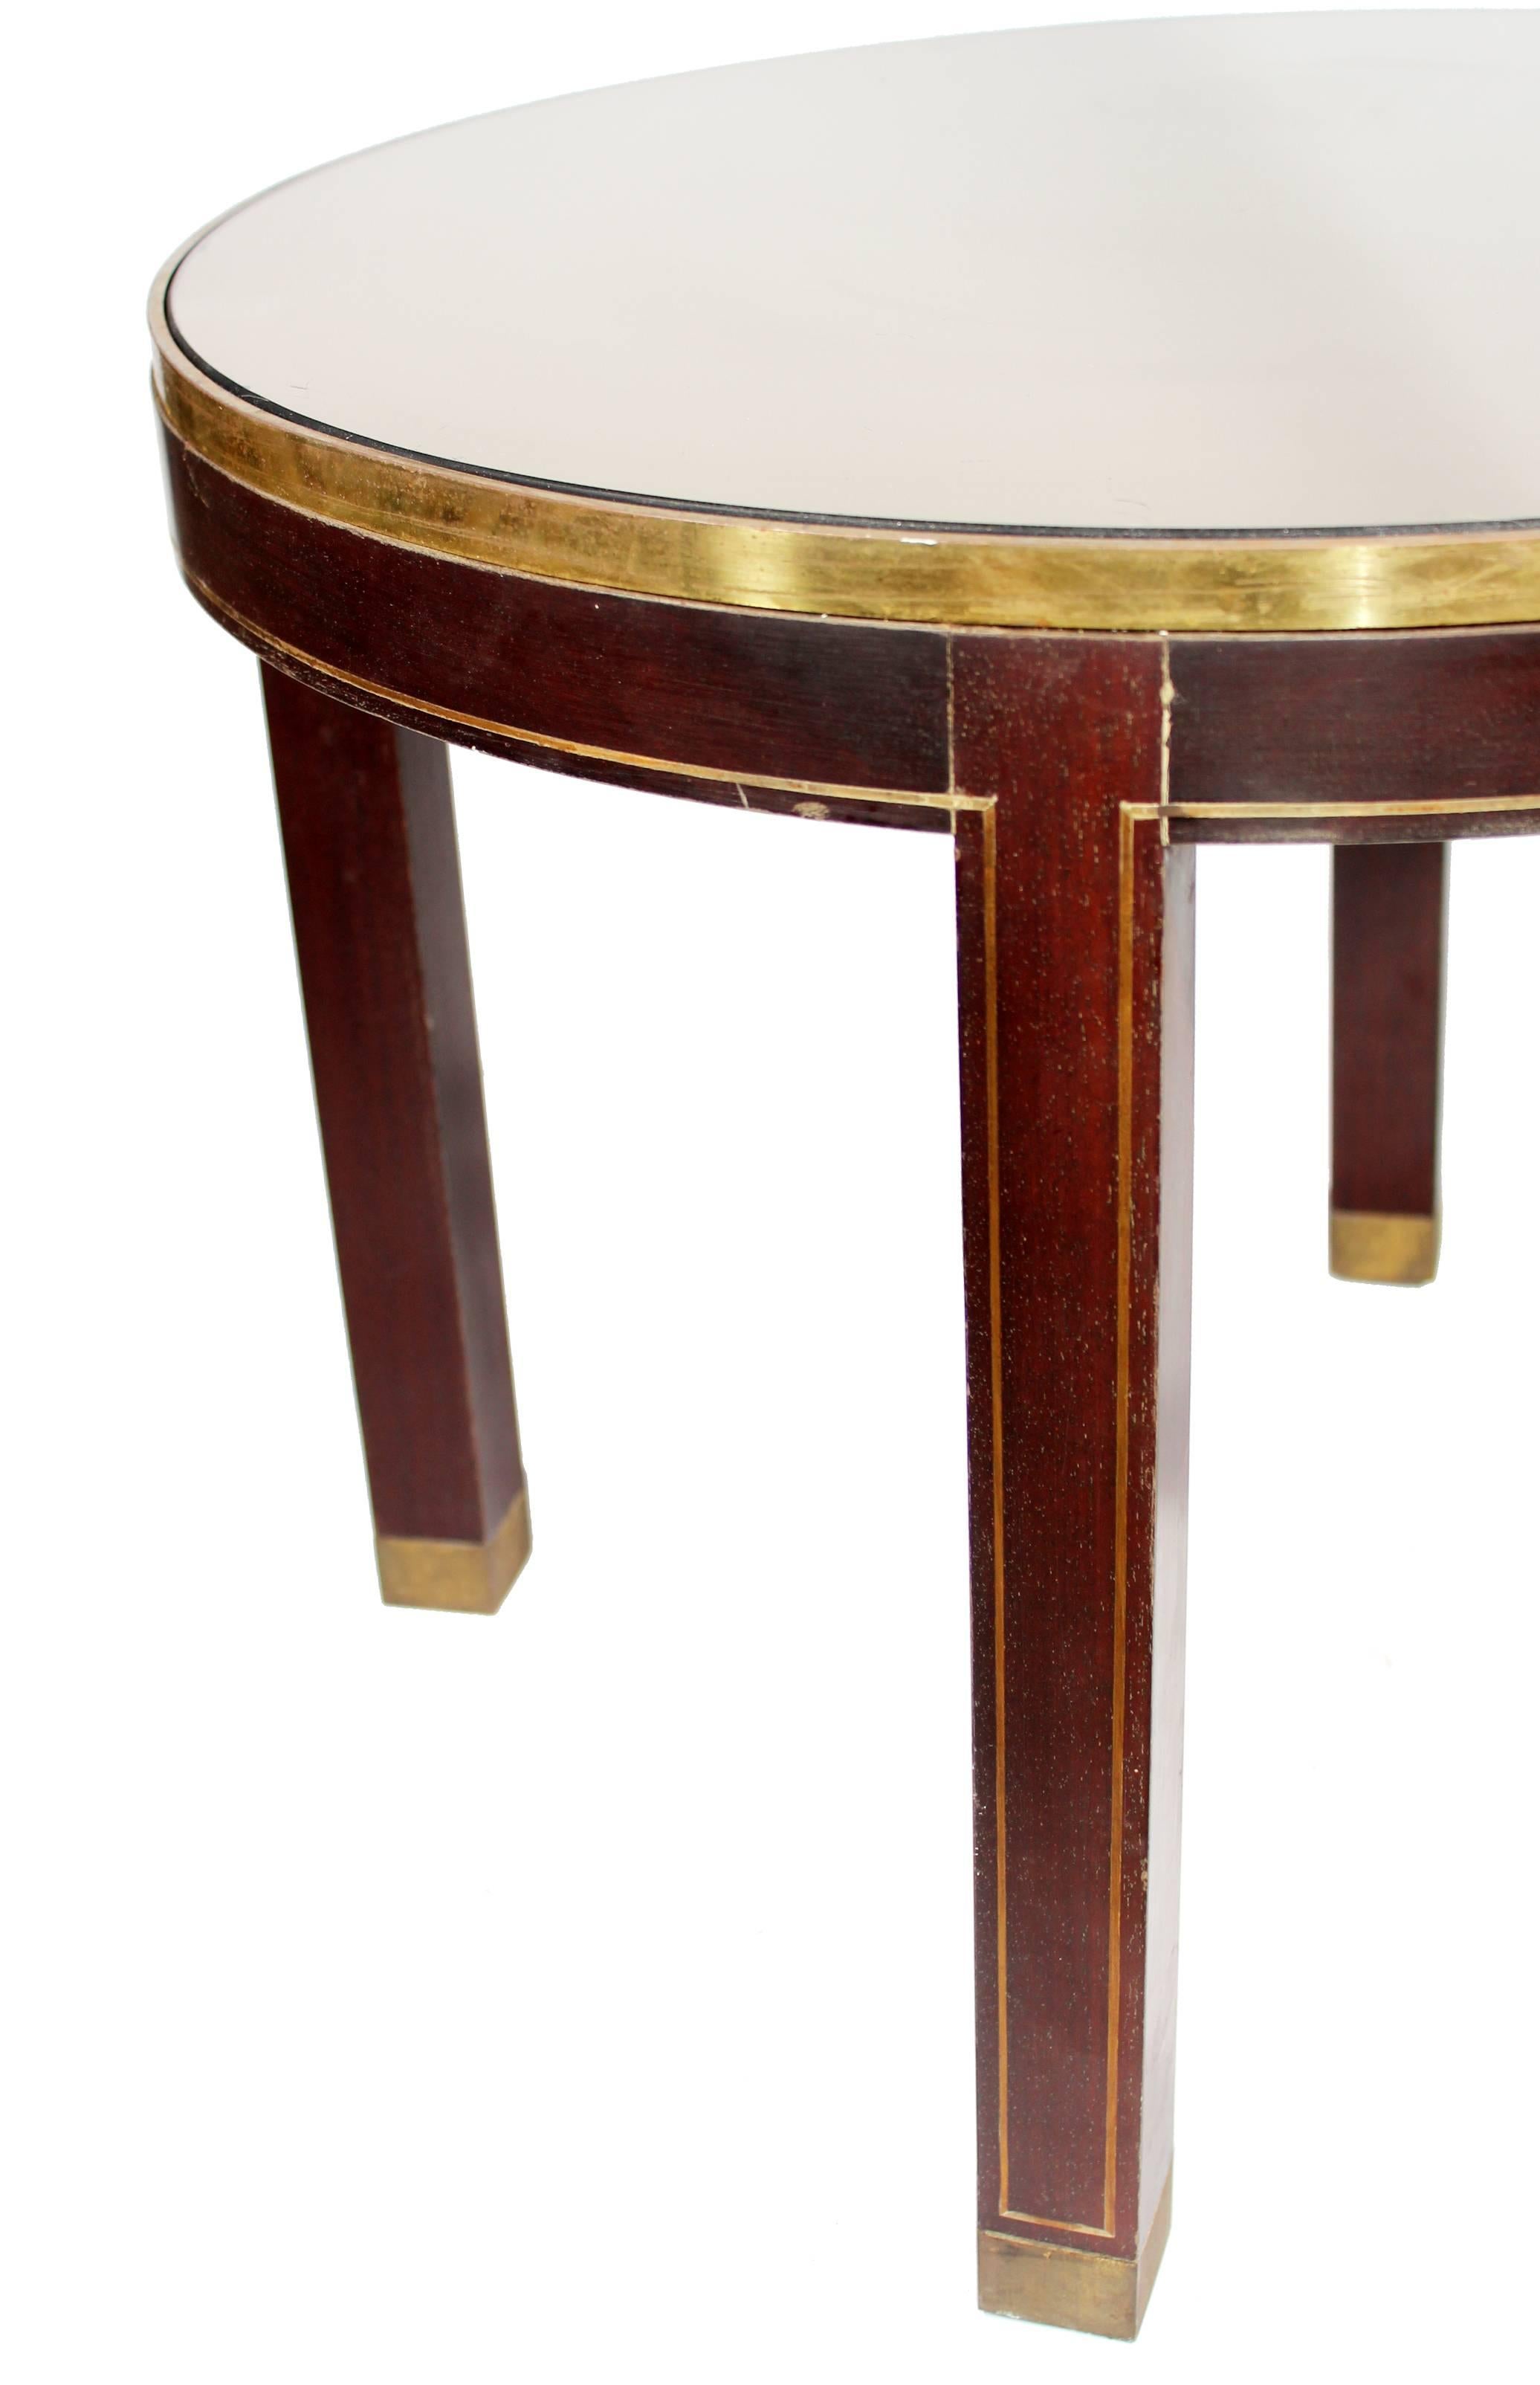 Spanish pair of round side tables with a thin strip of brass framing the mahogany wood rim and brass tipped legs. Original smoked mirror tabletop, which in the photos is reflecting a white ceiling.